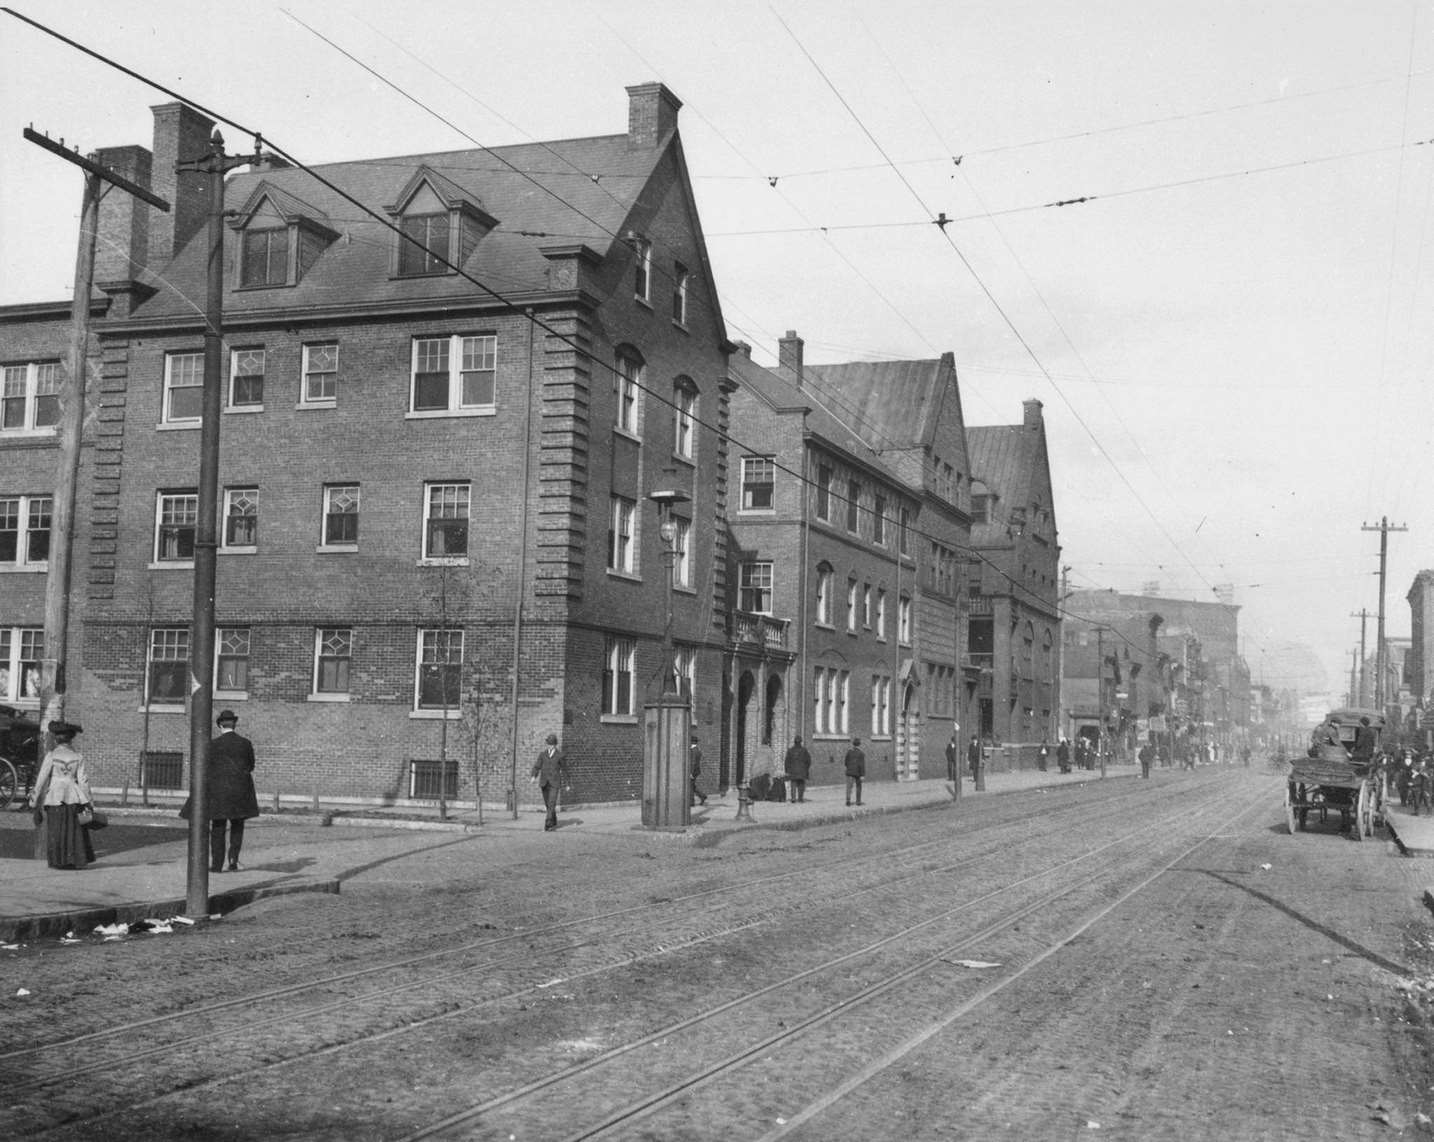 Hull House, the settlement house founded by Jane Addams and Ellen Gates Starr at 800 South Halsted Street in Chicago, 1910s.